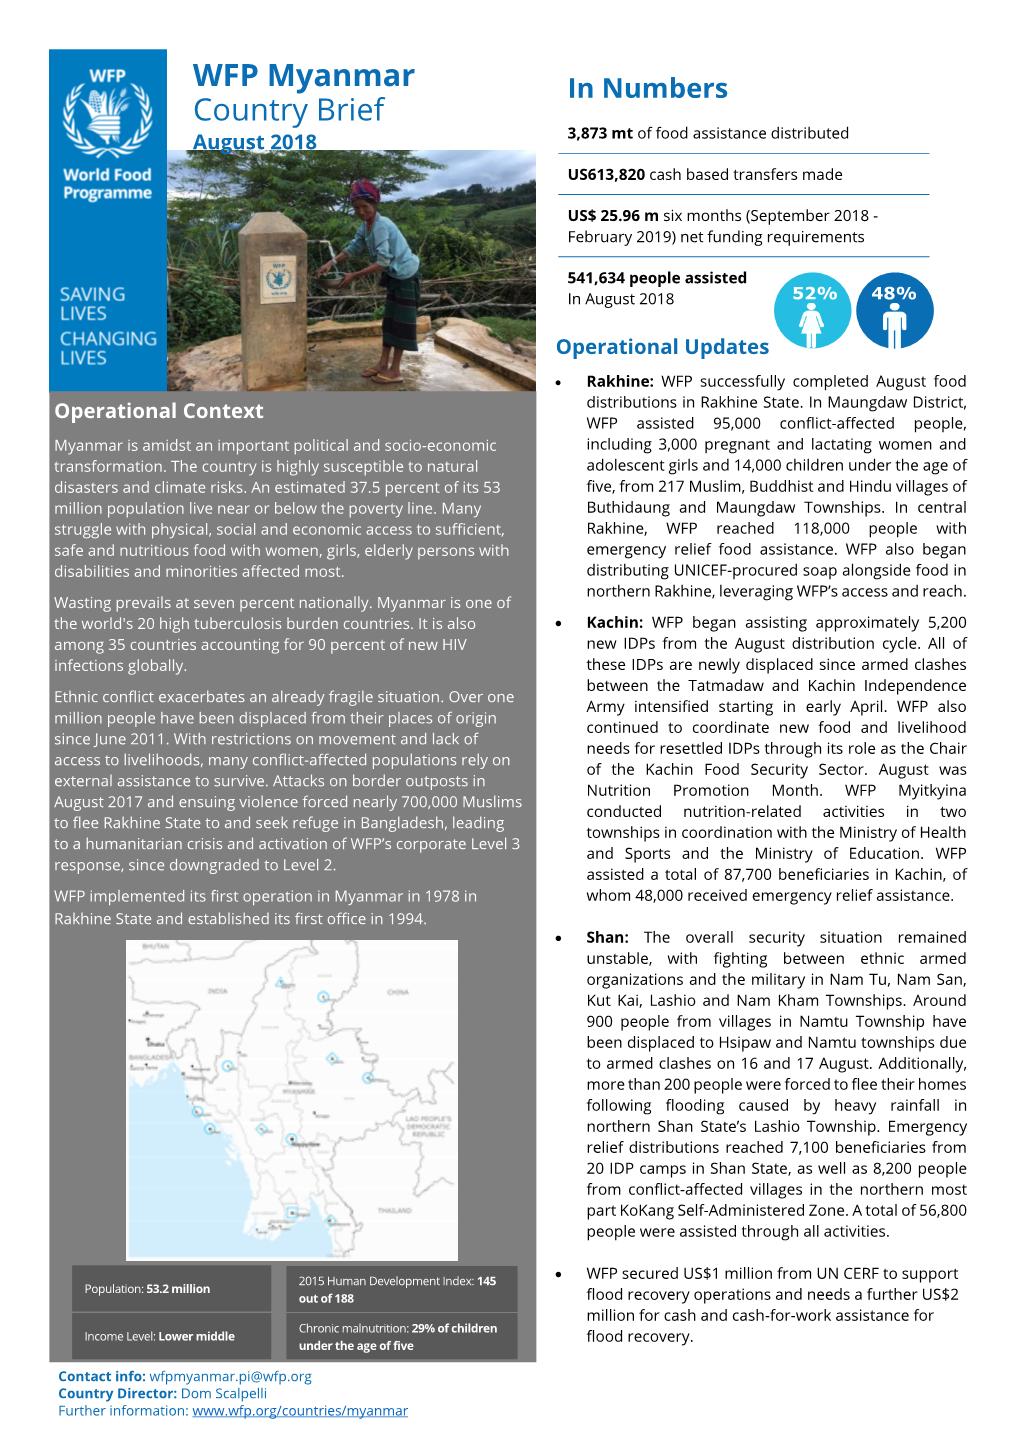 WFP Myanmar Country Brief Federation, Switzerland, the Republic of Turkey, United August 2018 Nations Central Emergency Response Fund, the United States of America